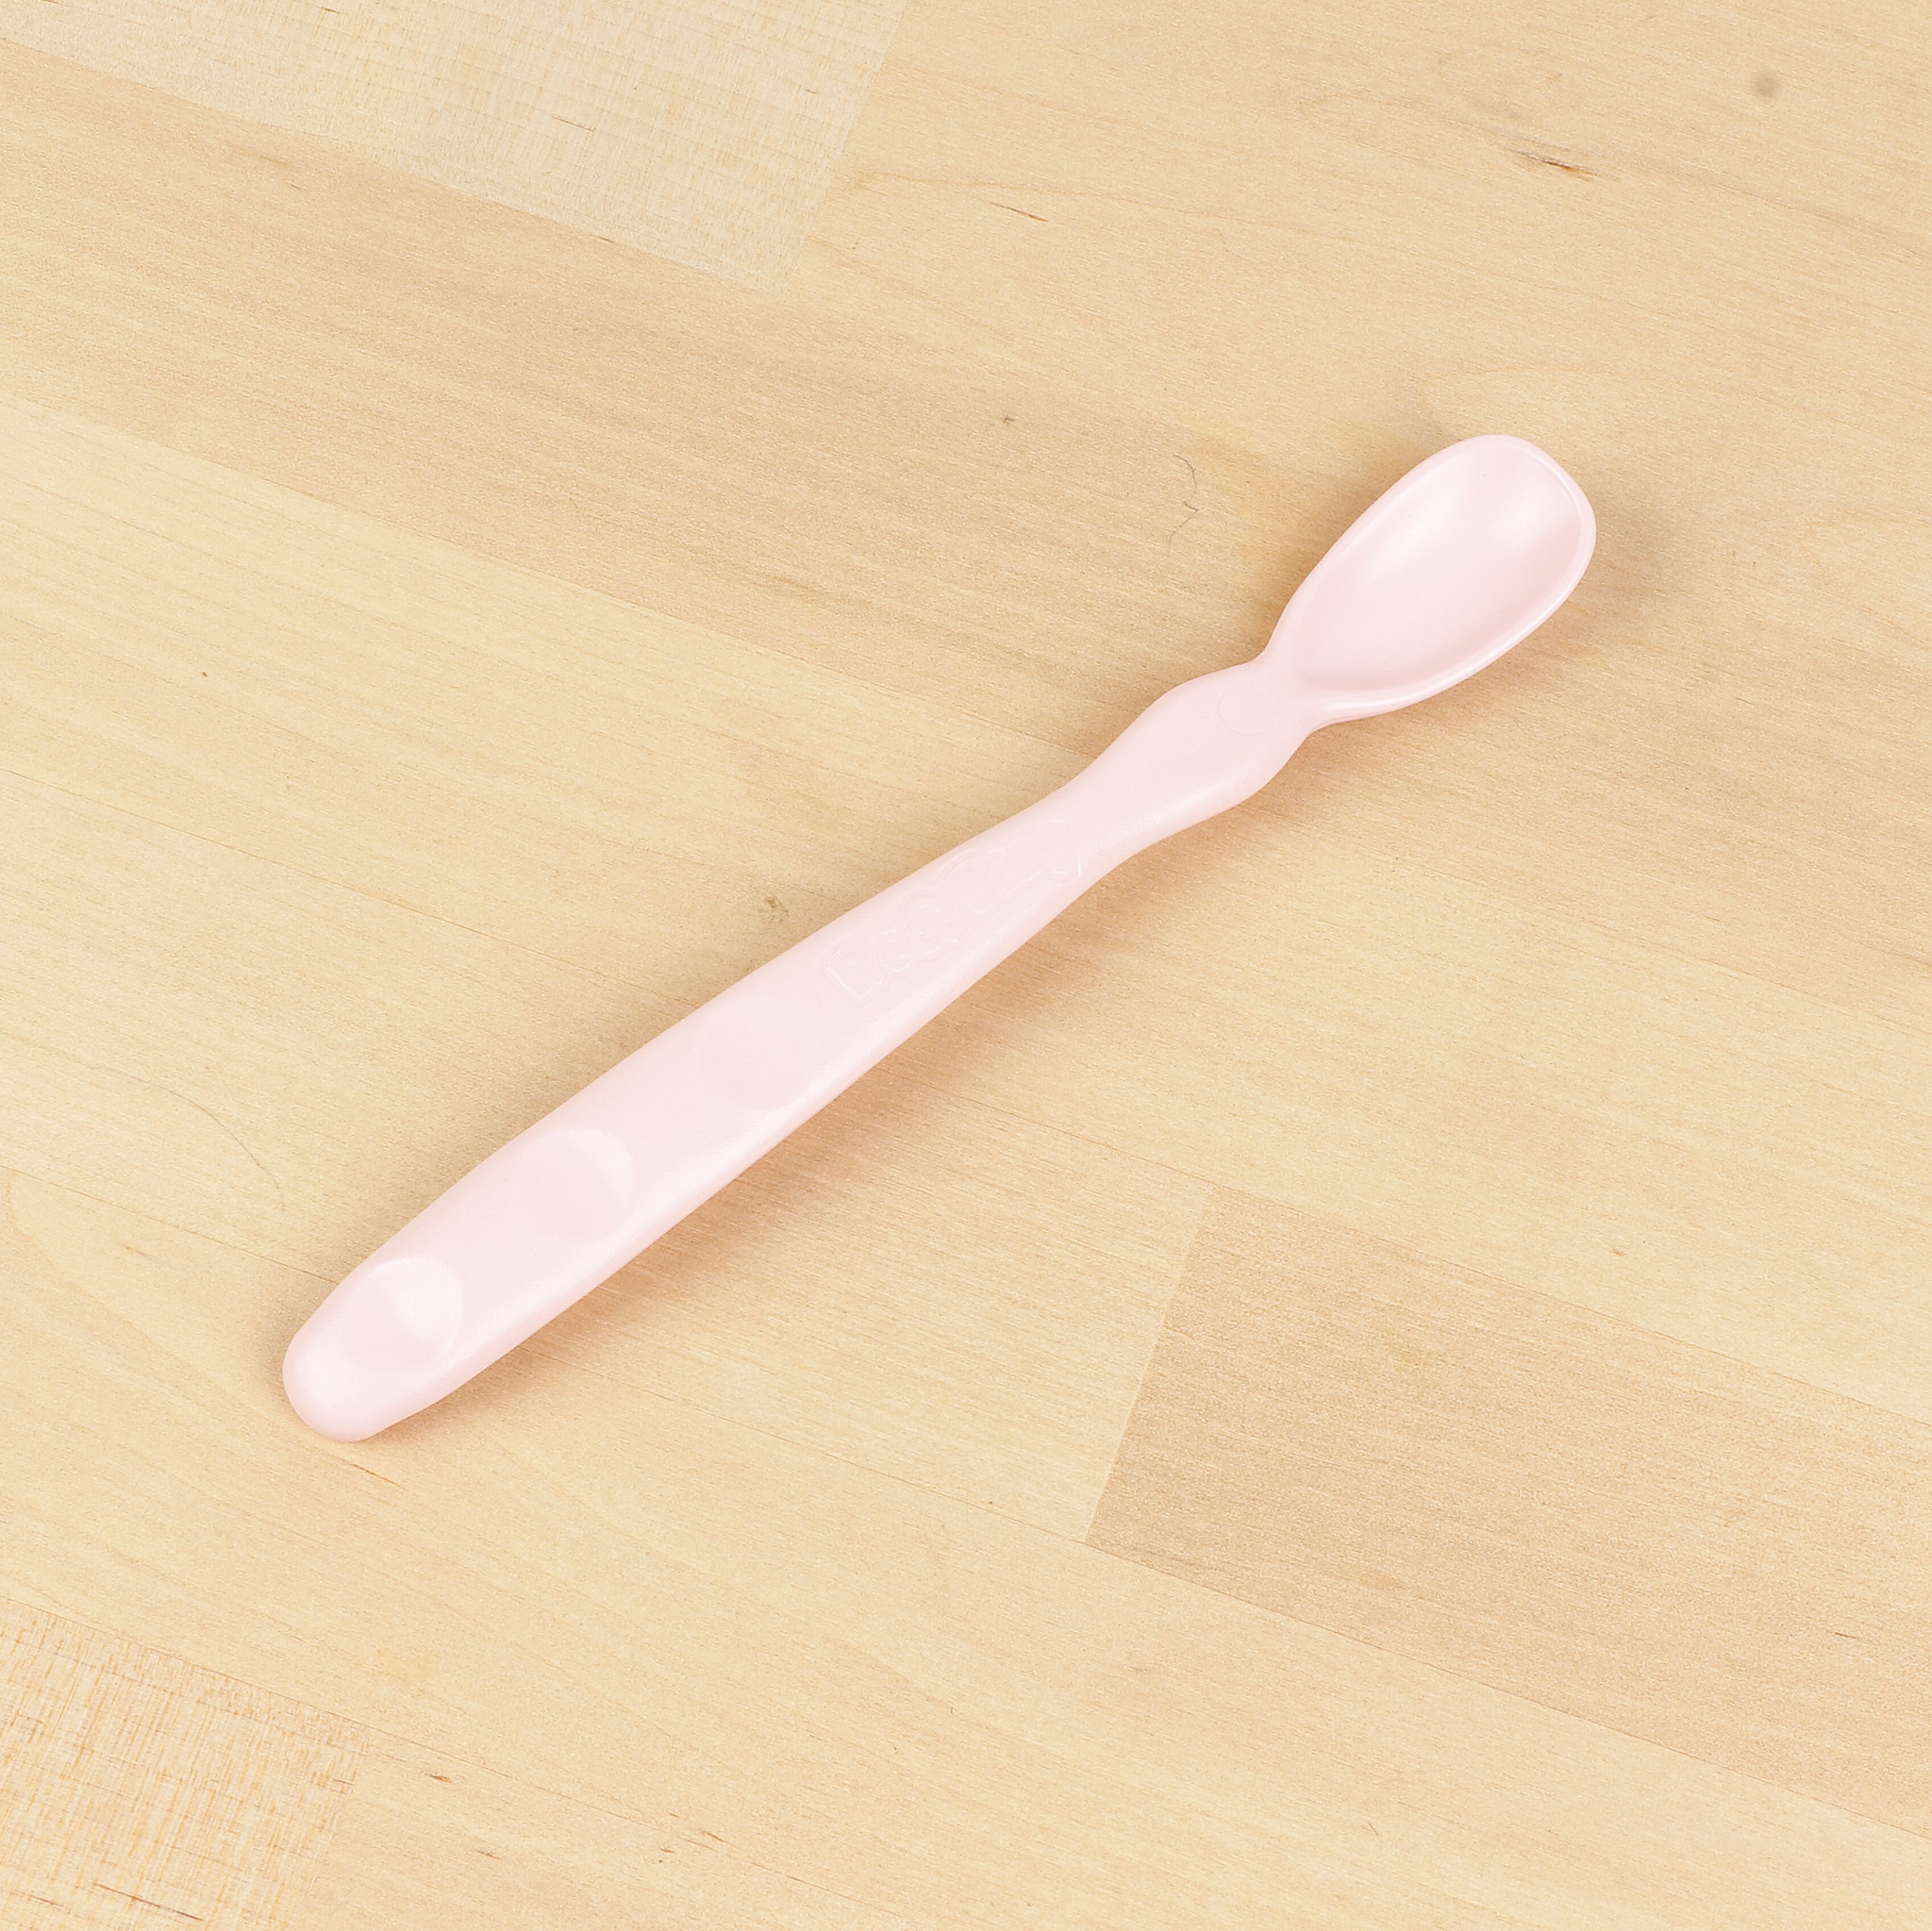 Infant Spoon Ice Pink